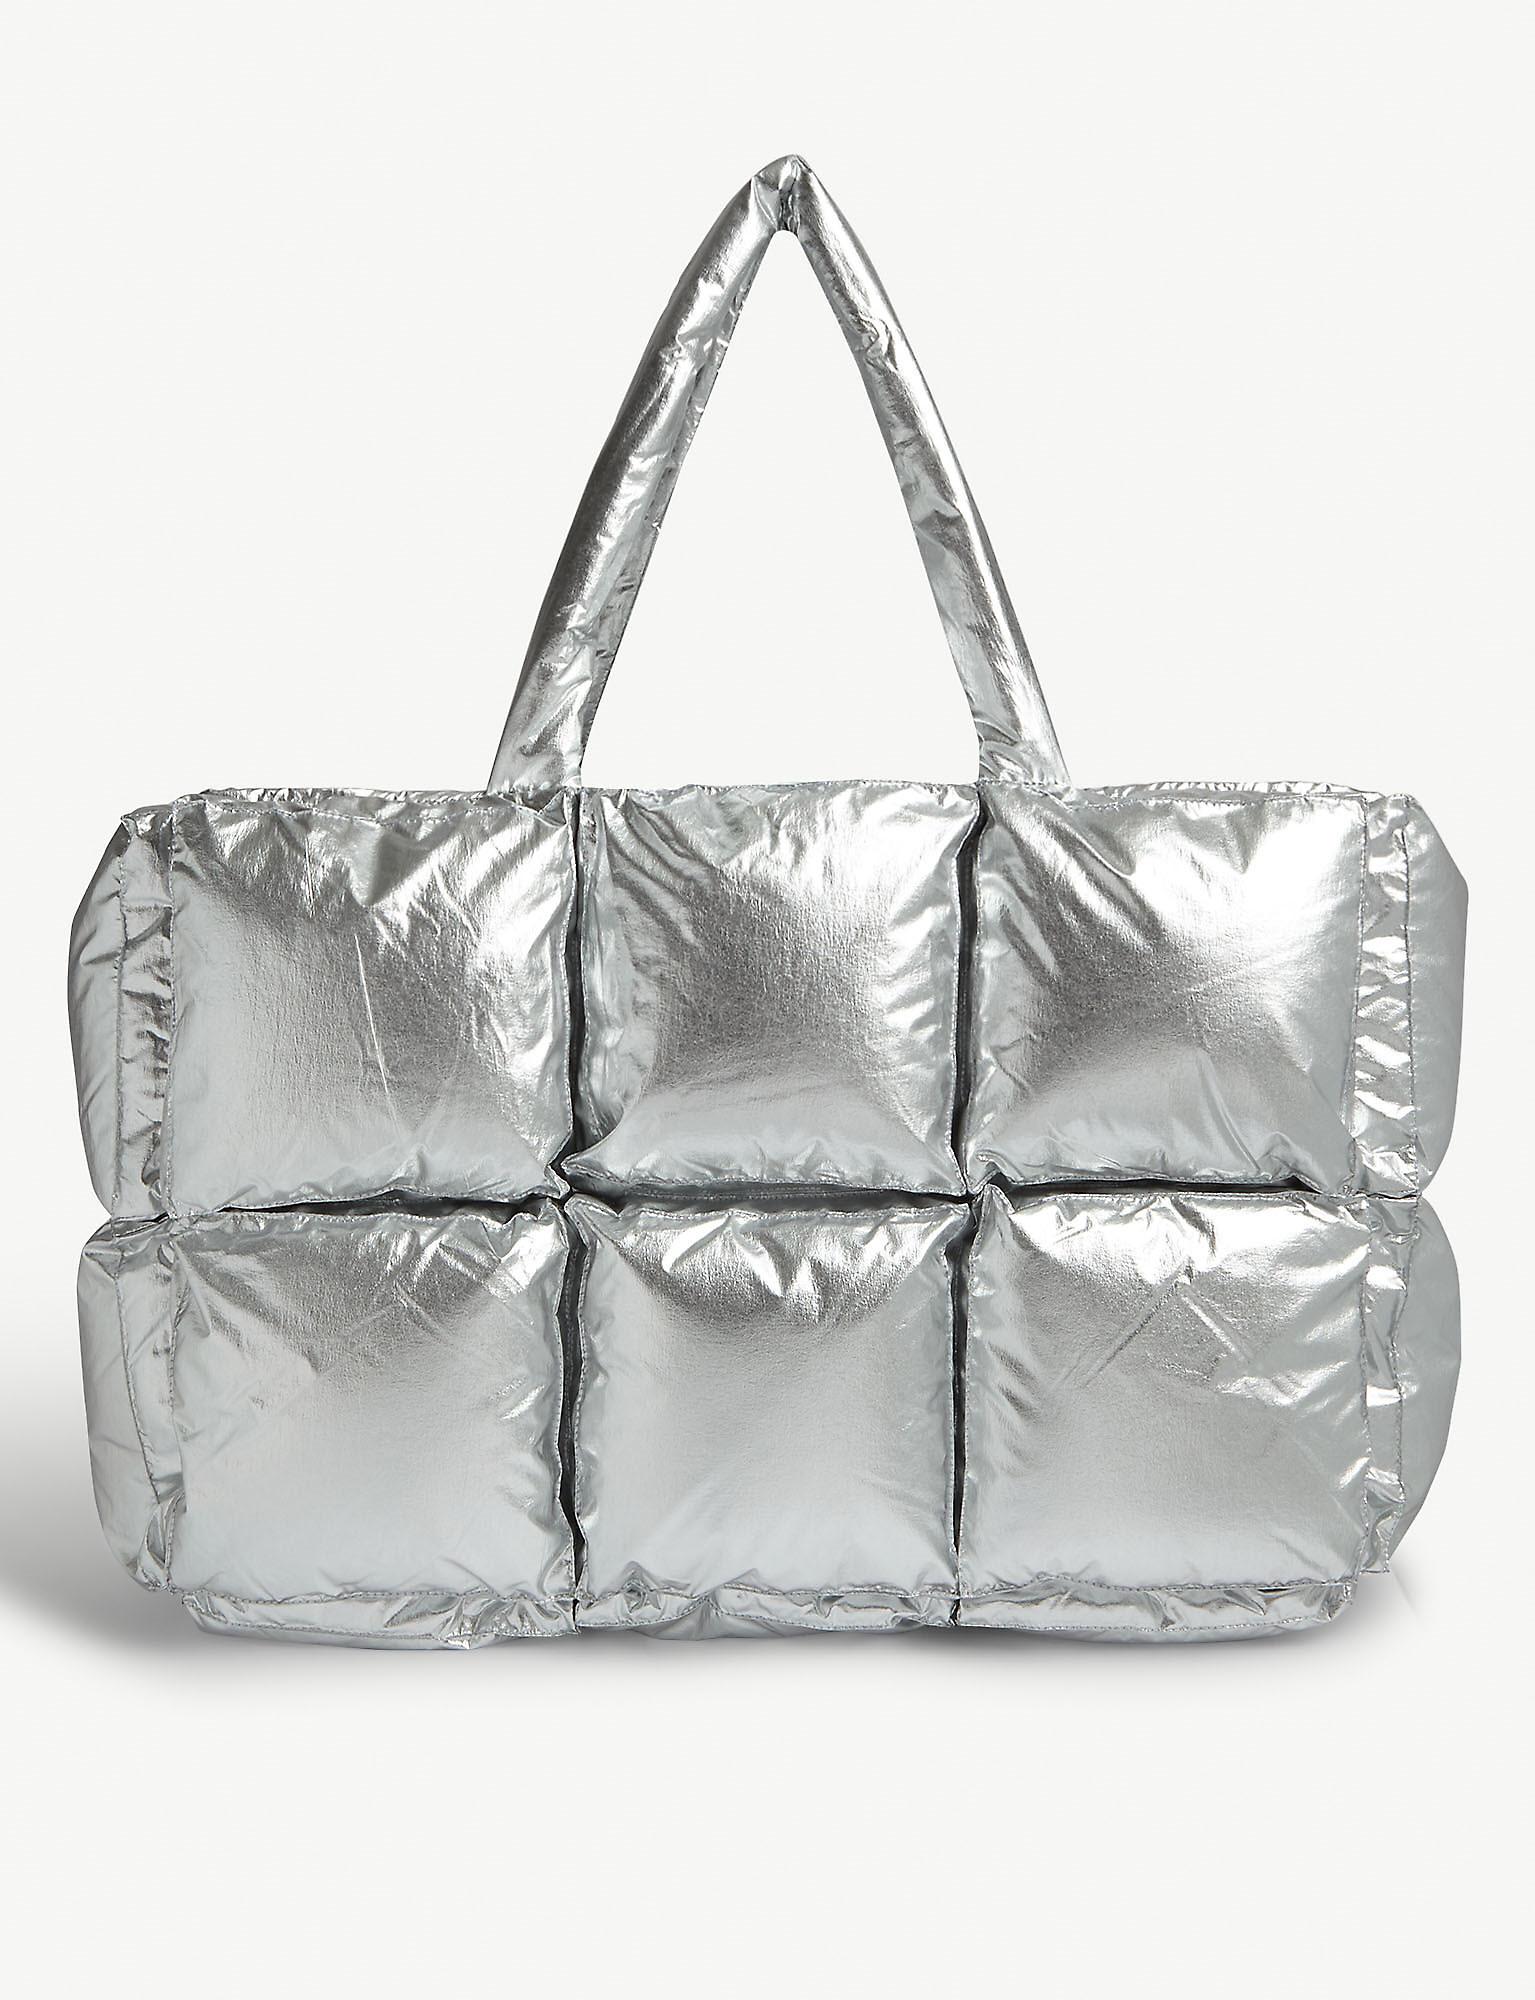 Off-White c/o Virgil Abloh Leather Xl Puffer Tote Bag in Silver (Metallic)  | Lyst